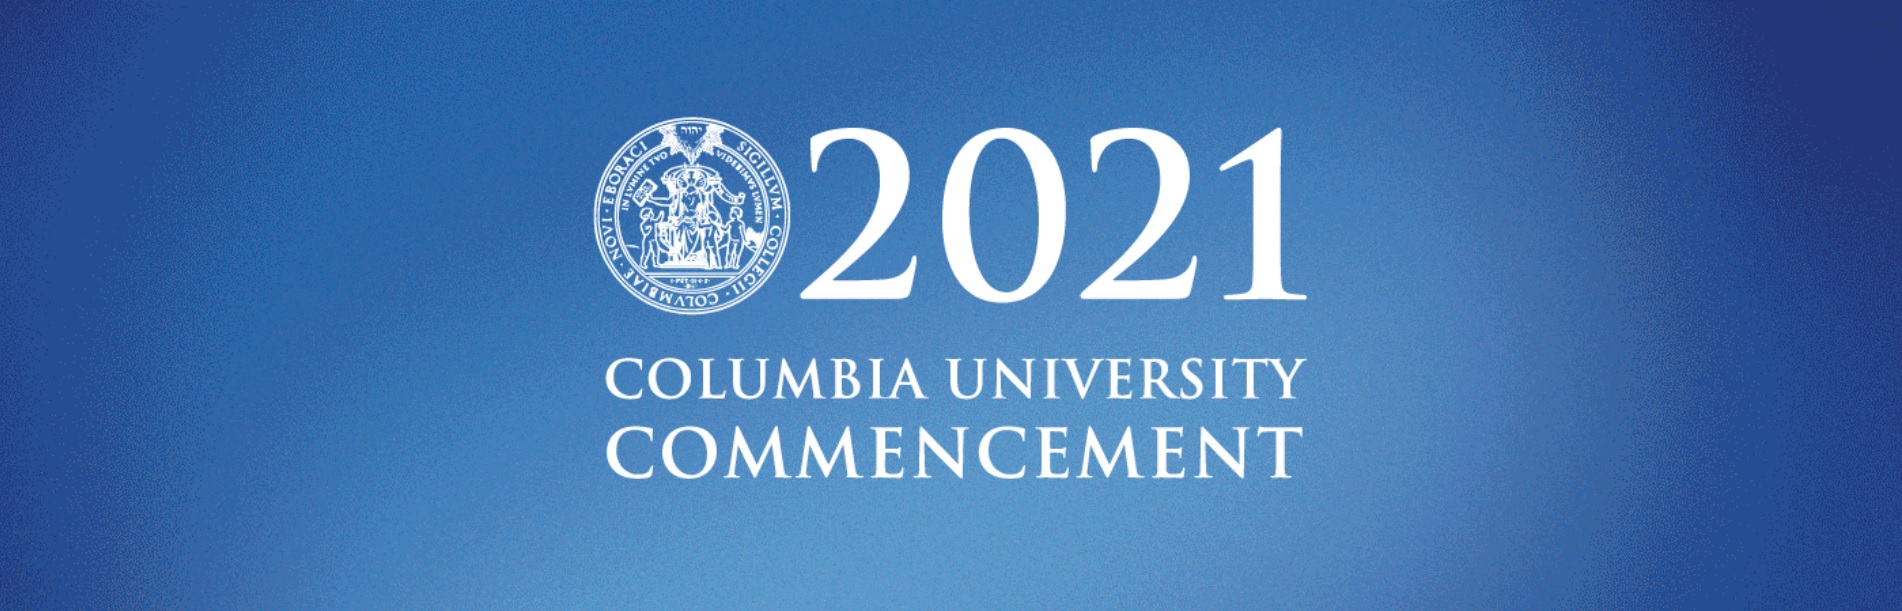 Commencement 2021 image with University seal